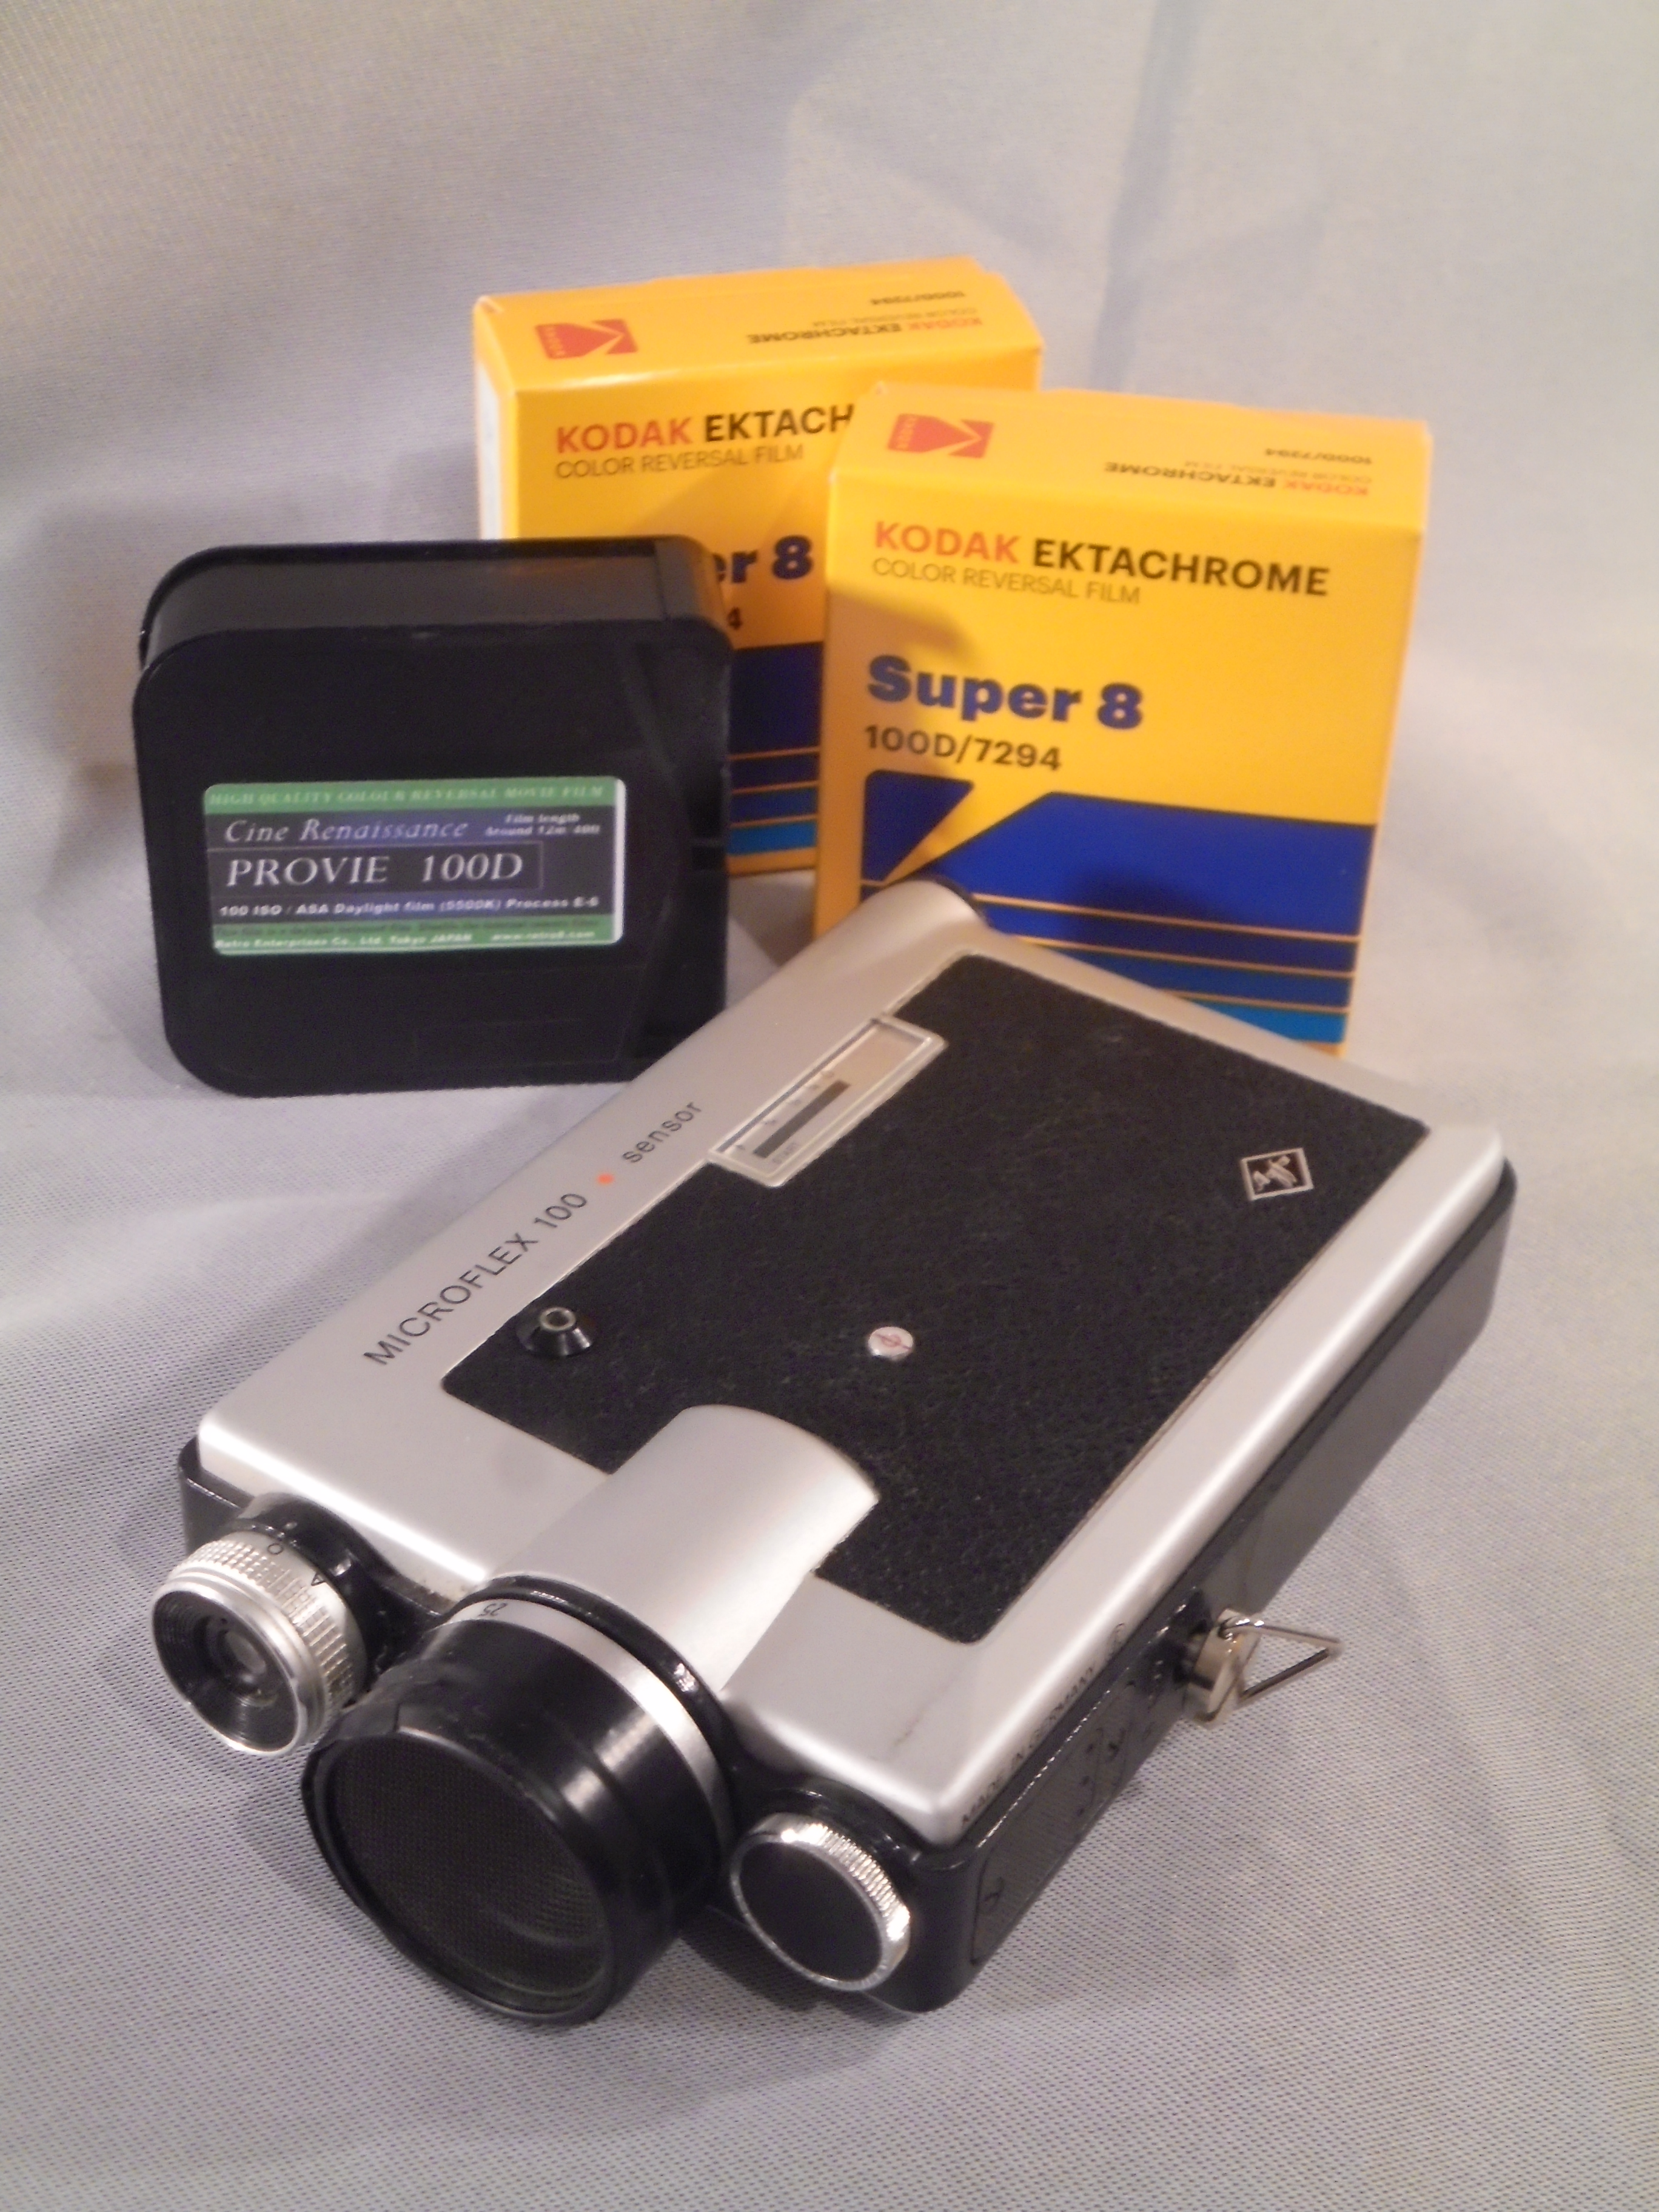 Making the Agfa Microflex ready for Provie and E100D